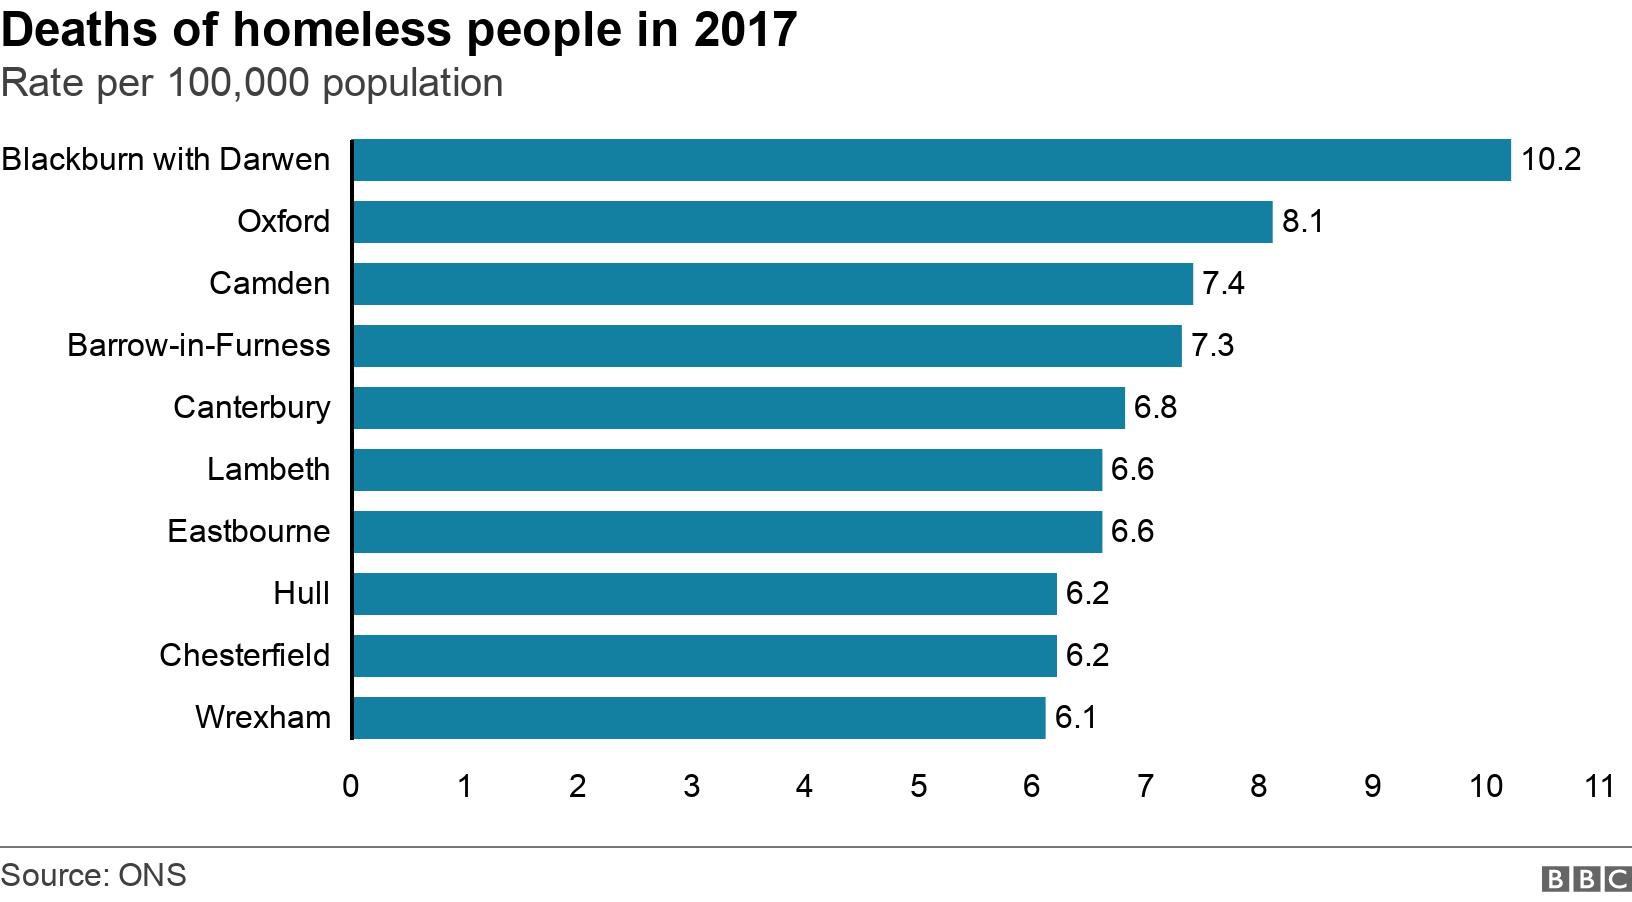 Deaths of homeless people in 2017. Rate per 100,000 population. Death rates of homeless people by local authority area. .